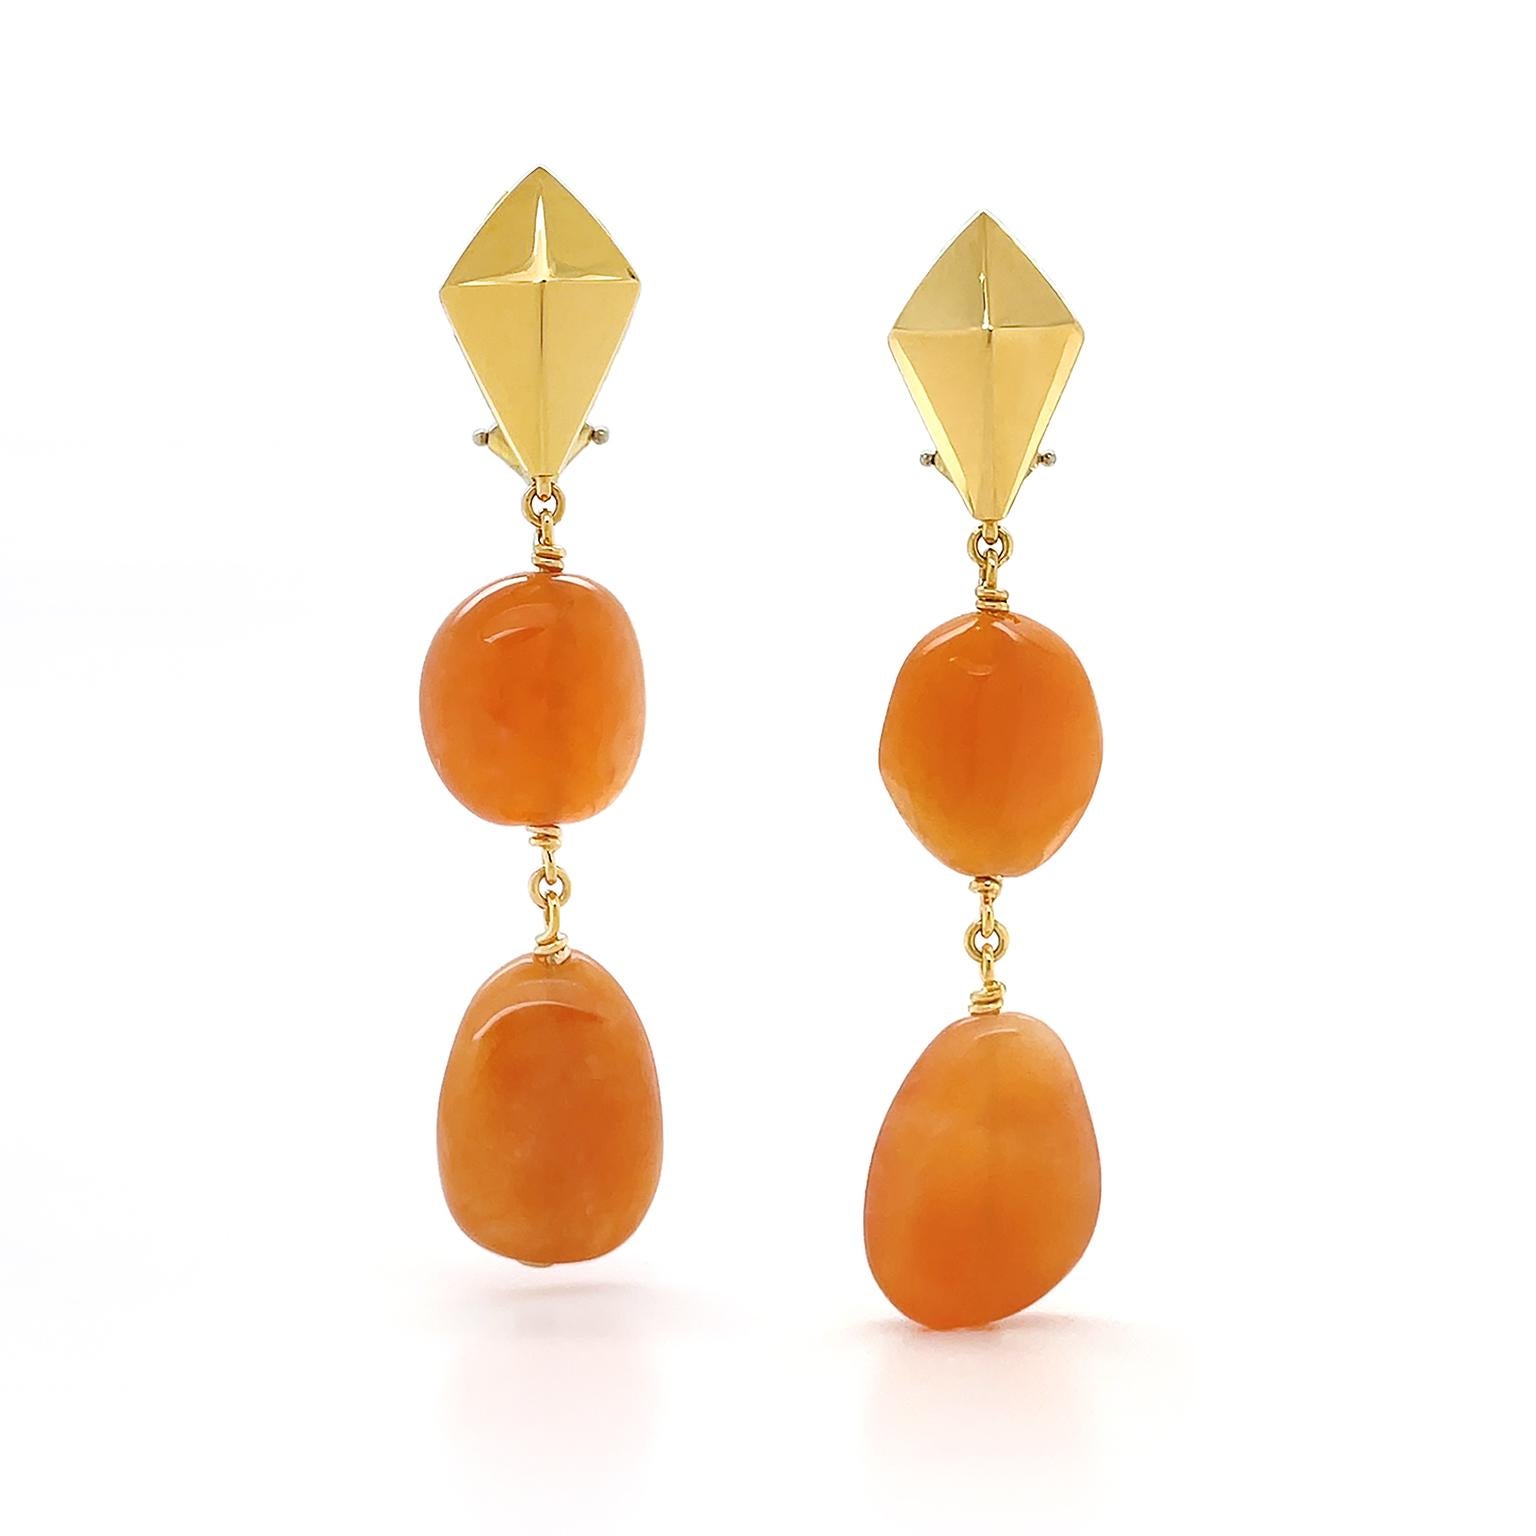 Vibrant warm tones are the essence of these drop earrings. An 18k yellow-gold kite reflects luminosity across its defined surfaces. This follows with gold links securing two individual carvings of semiprecious carnelian. Each carving in a unique